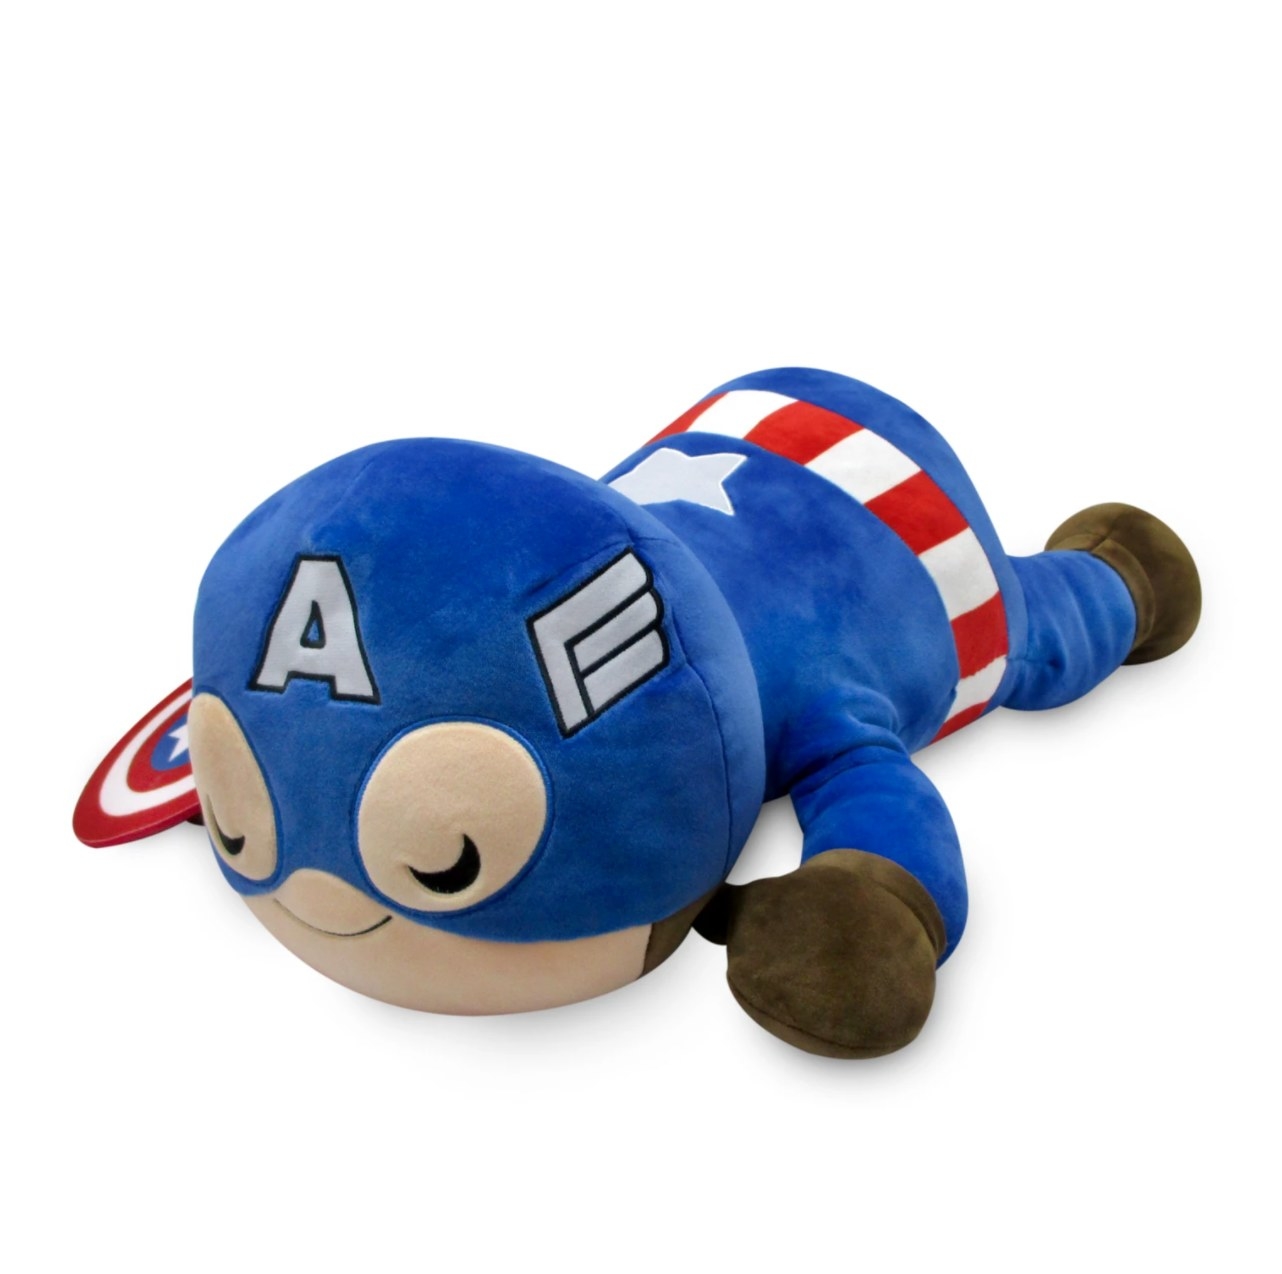 the captain america cuddly toy